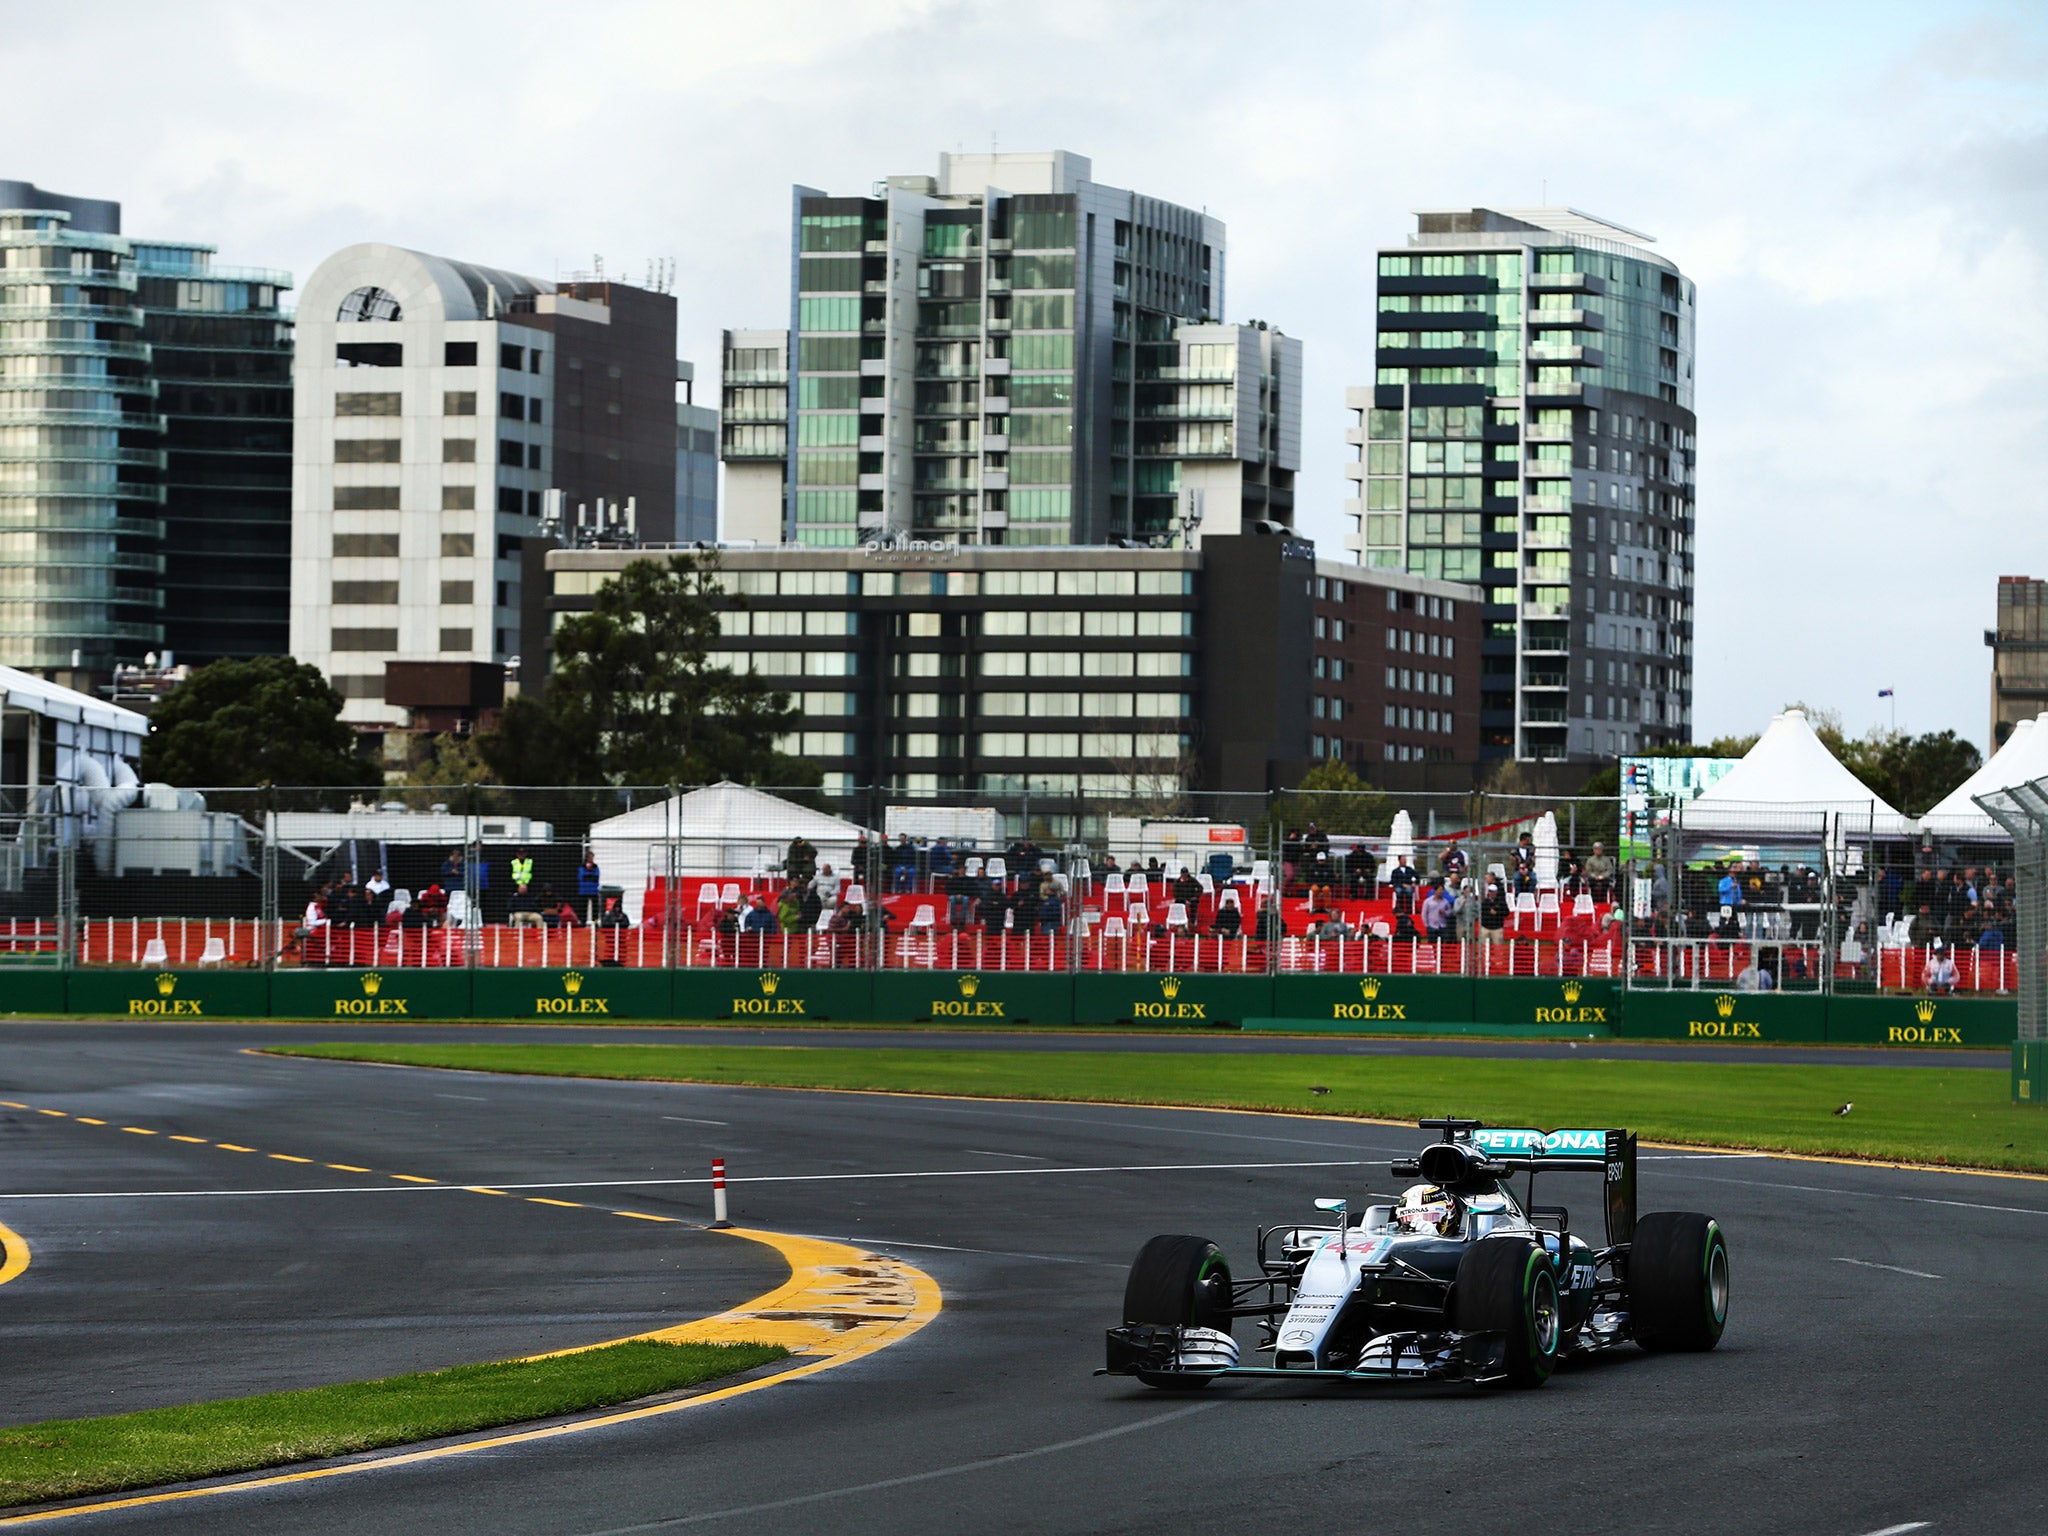 Lewis Hamilton rounds the final turn in Melbourne to set the fastest time in practice